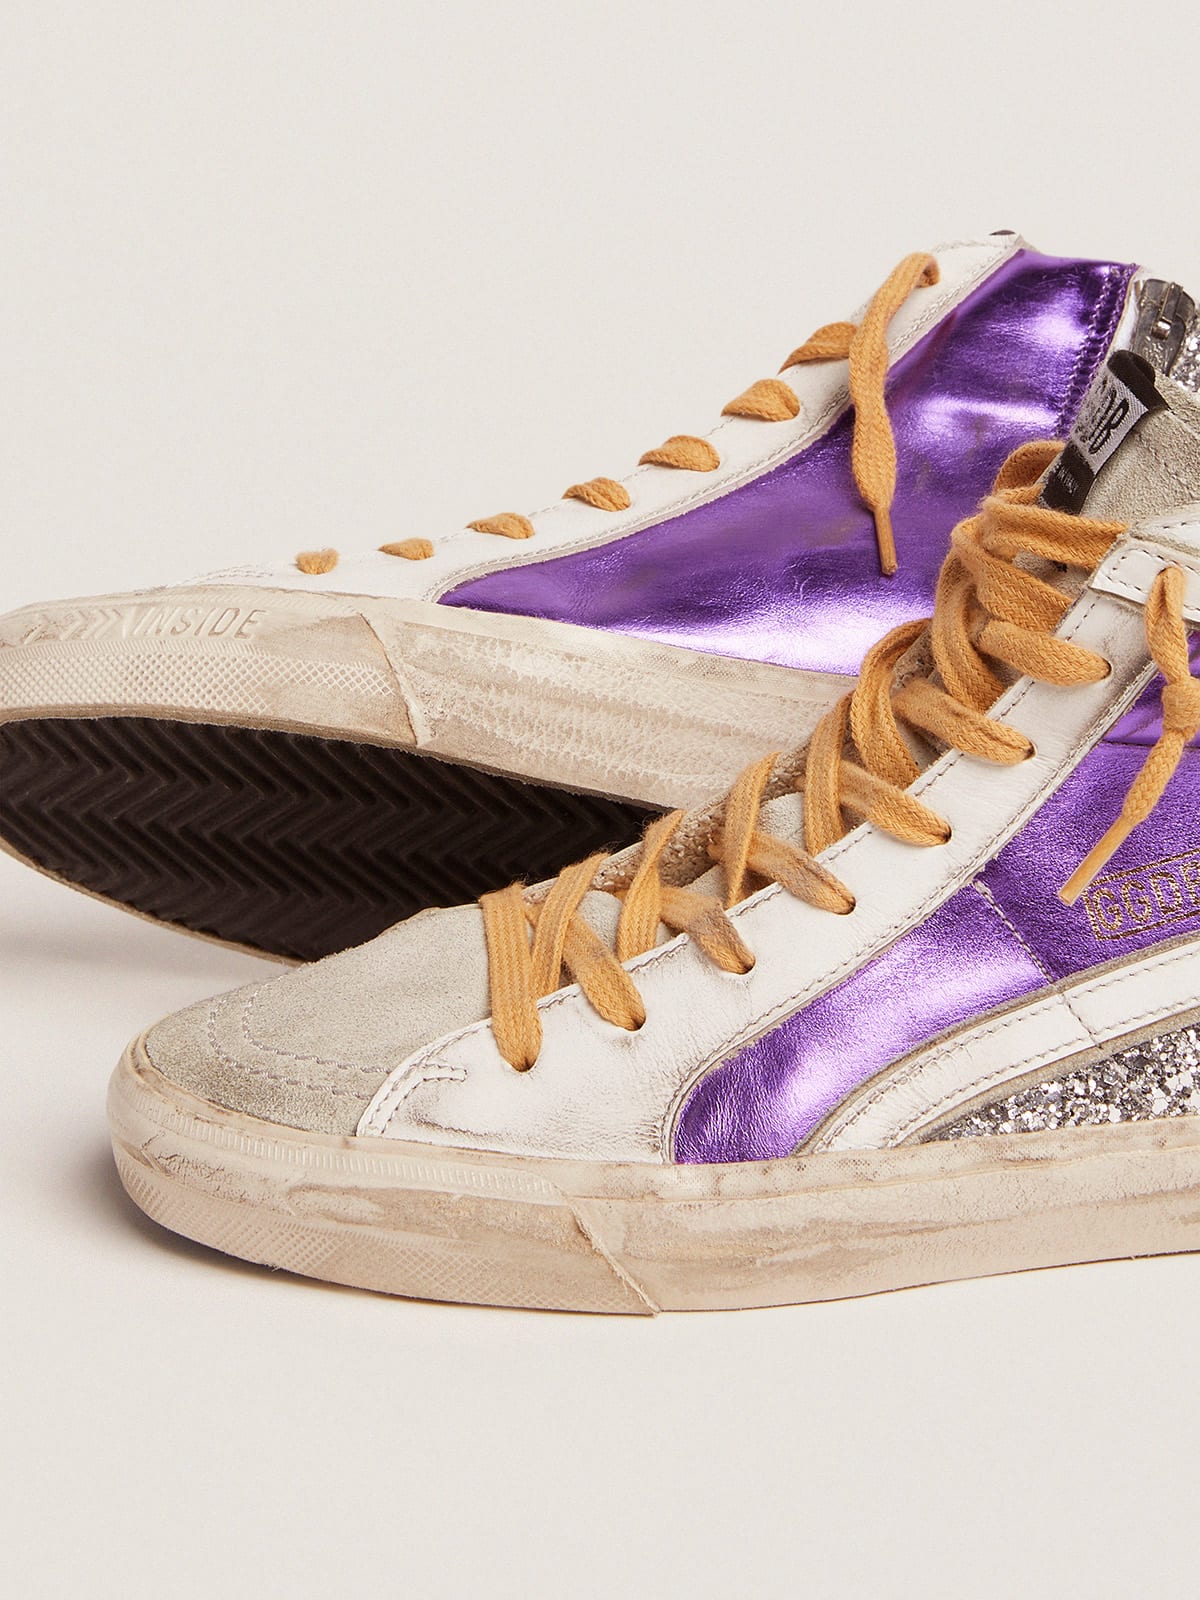 Slide sneakers with silver glitter and purple laminated leather upper